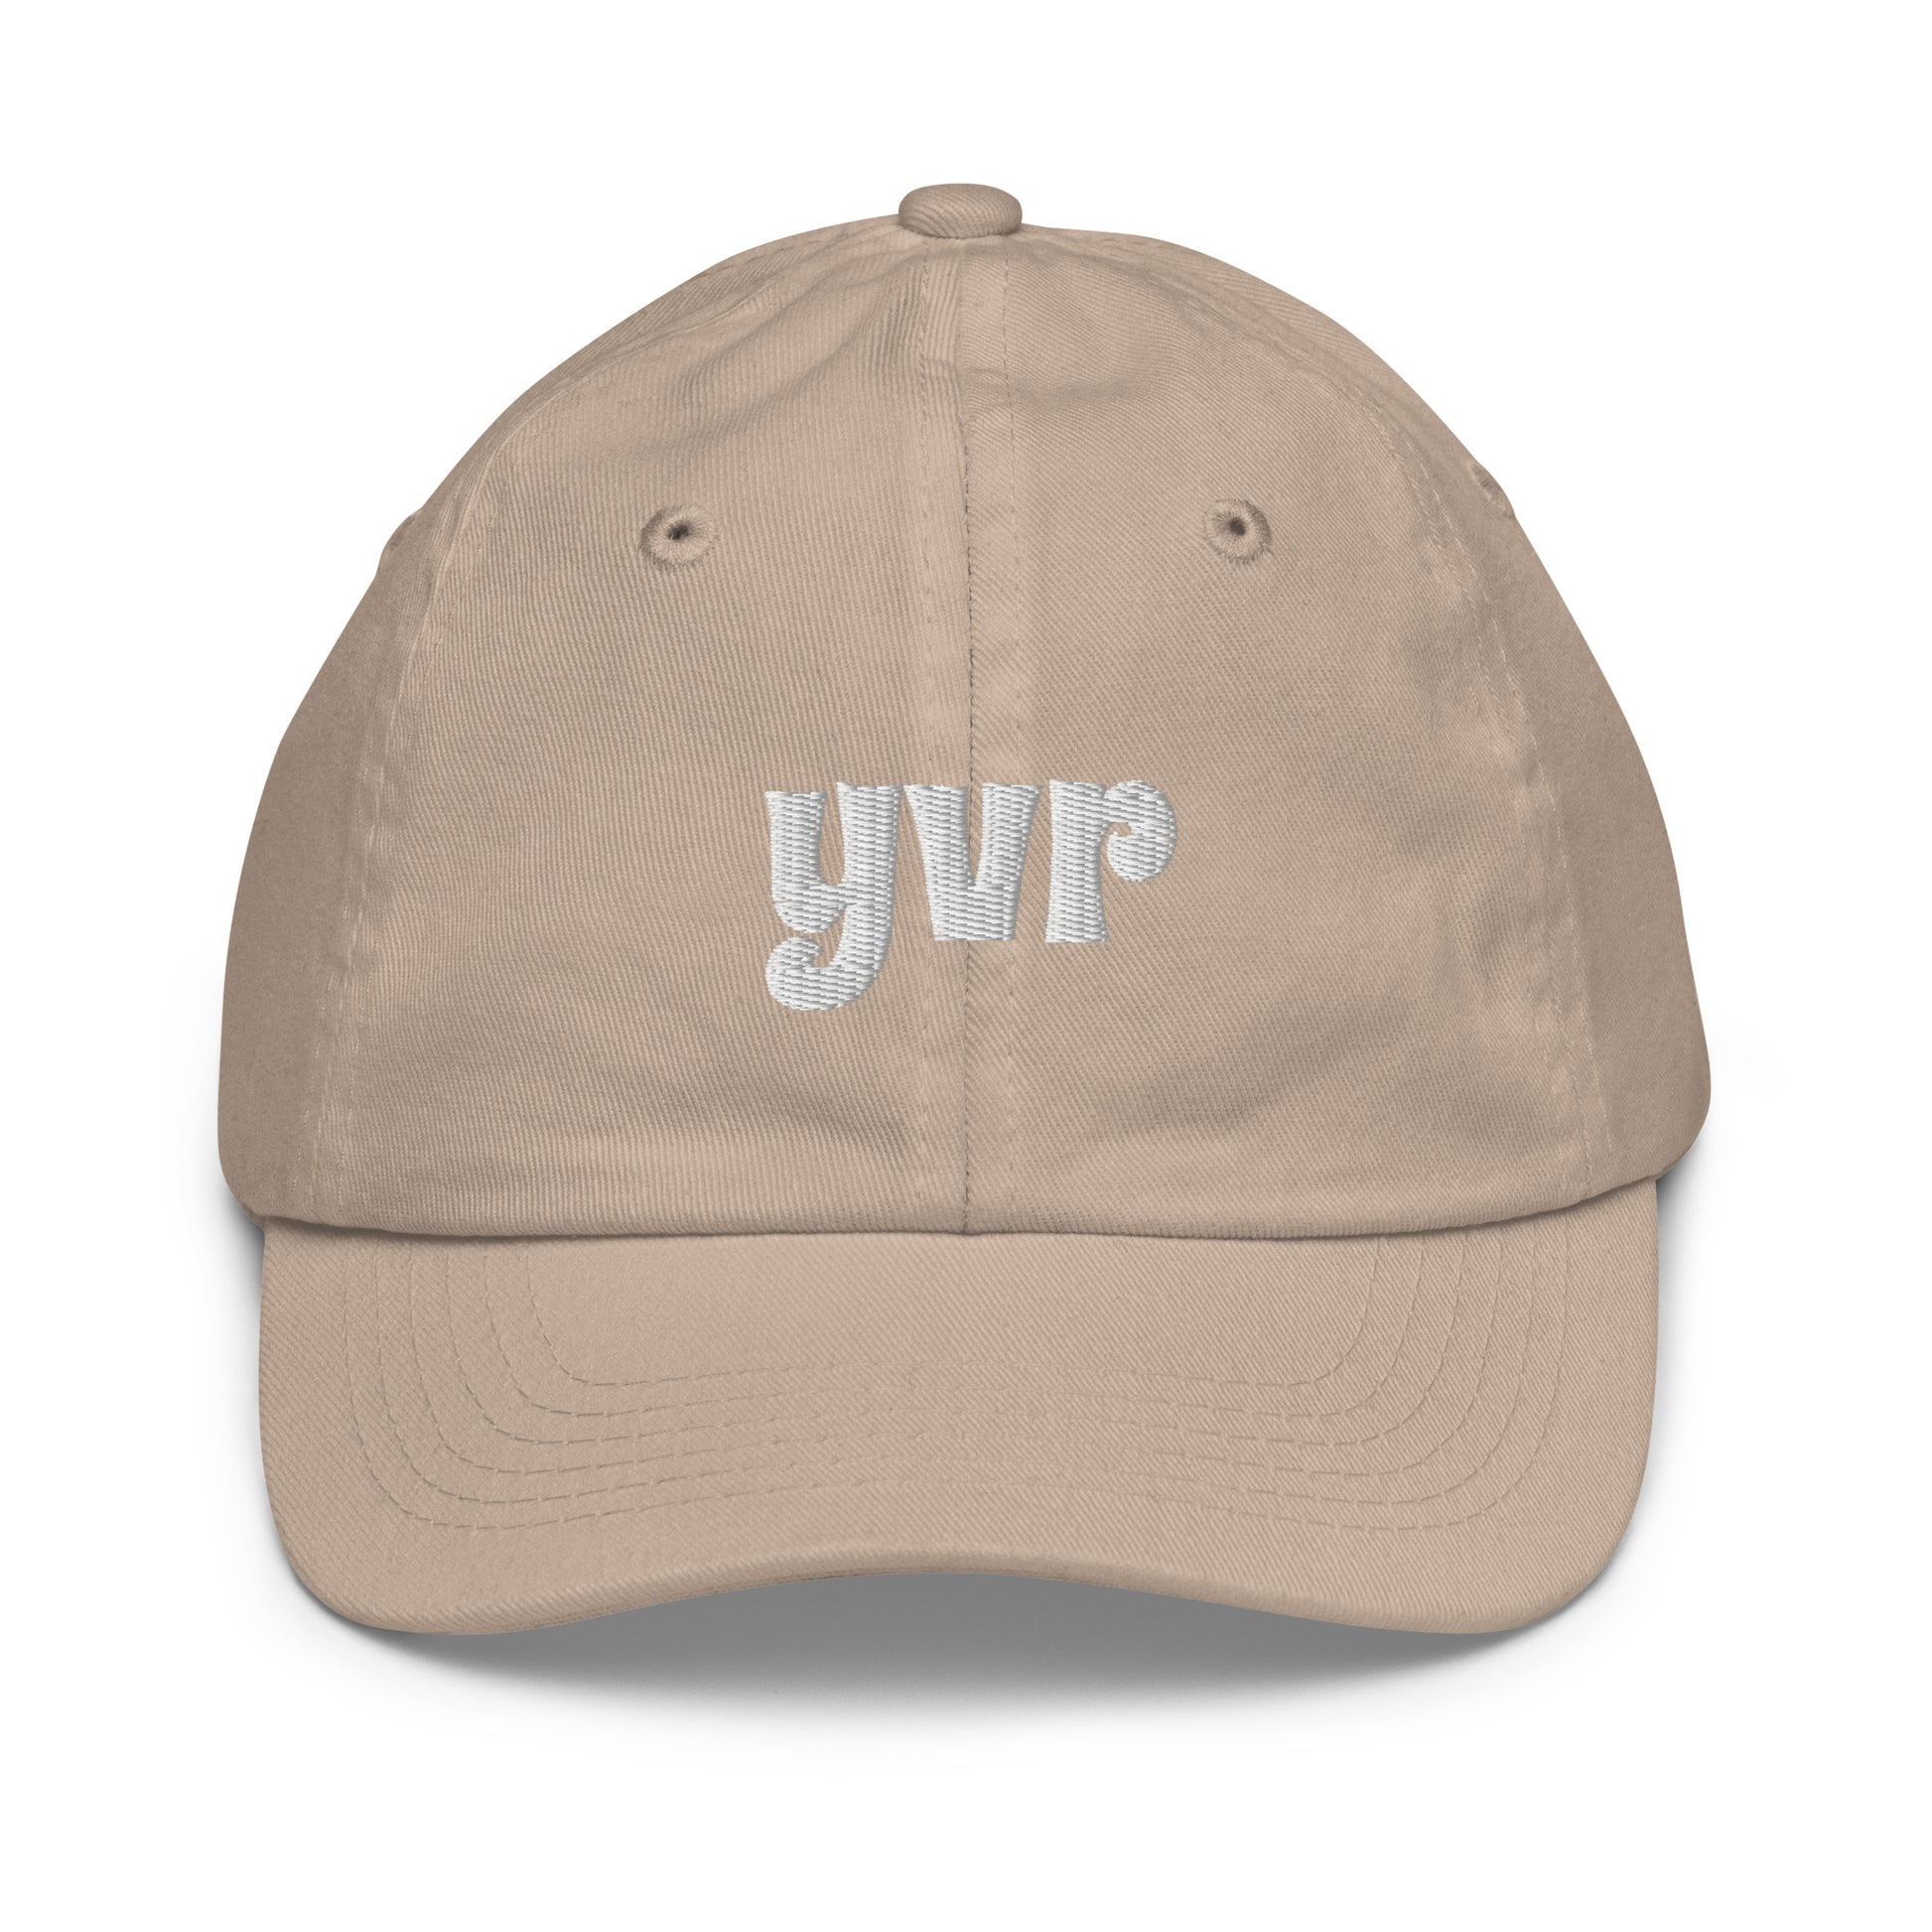 Groovy Kid's Baseball Cap - White • YVR Vancouver • YHM Designs - Image 21